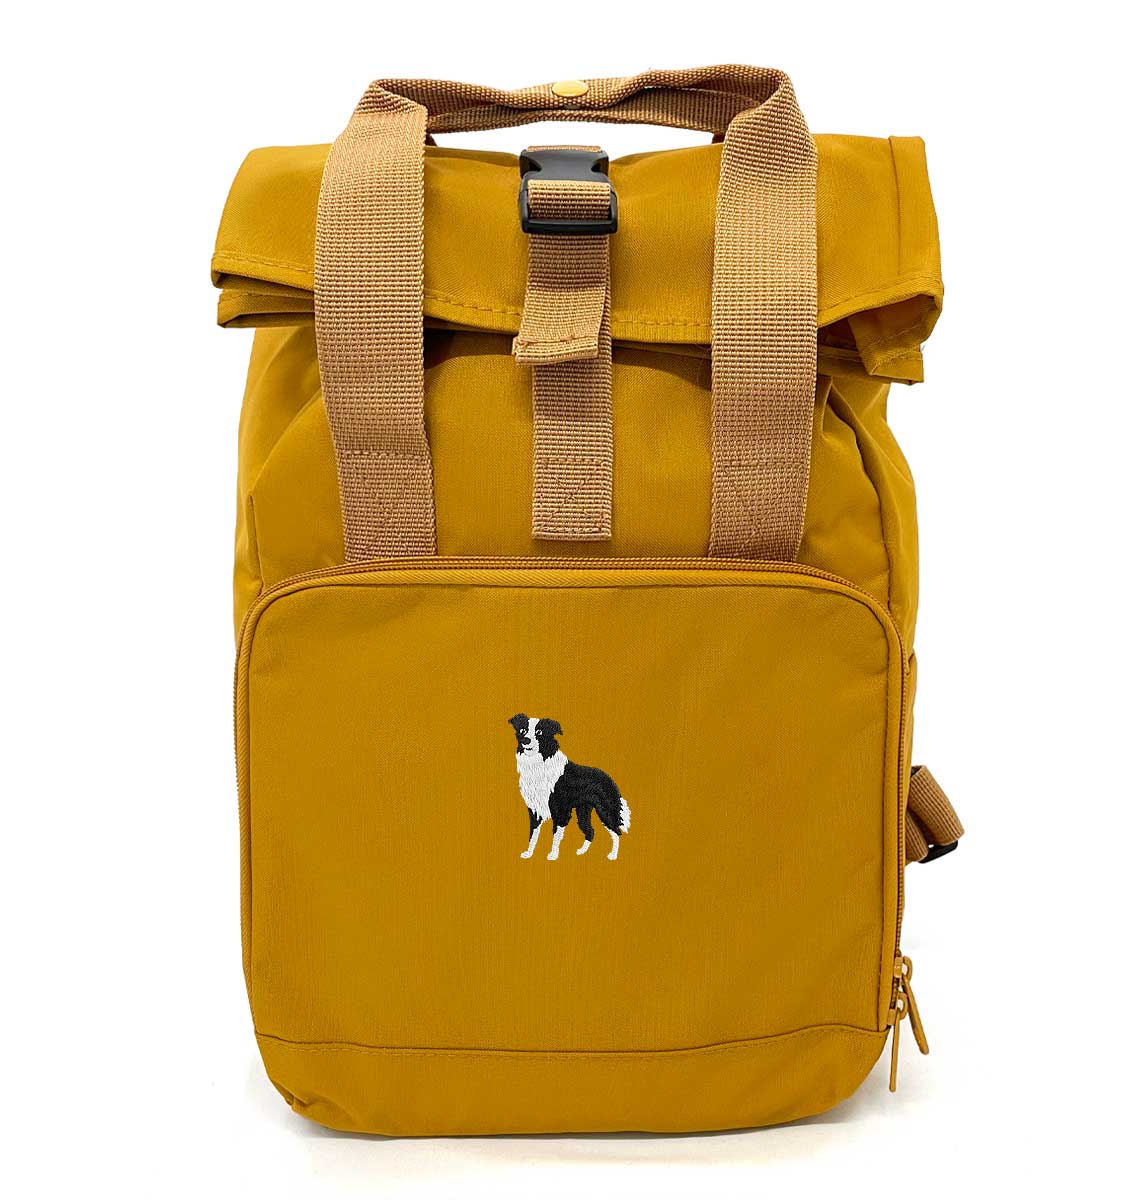 Collie Dog Mini Roll-top Recycled Backpack - Blue Panda